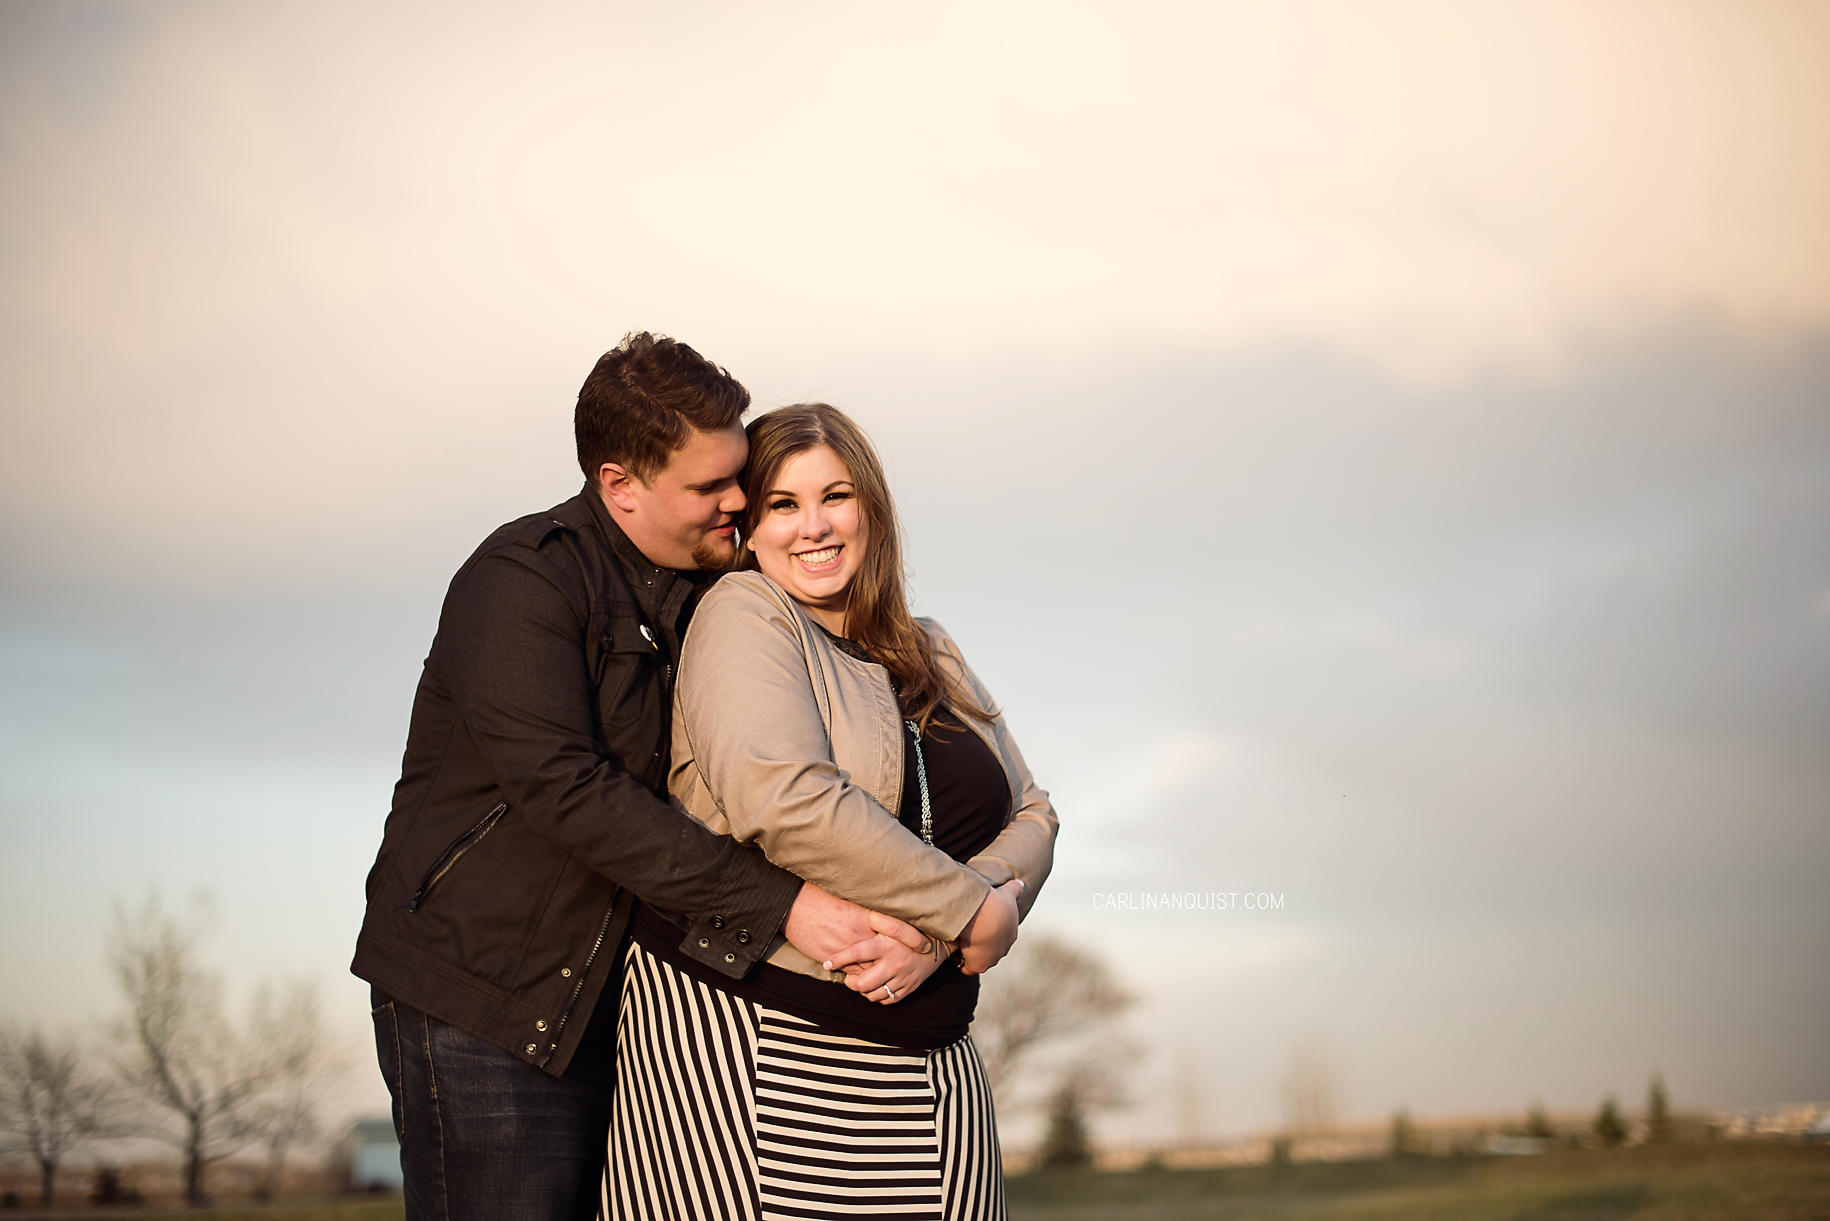 Sunset Engagement Session | Calgary Wedding Photographers | Carlin Anquist Photography